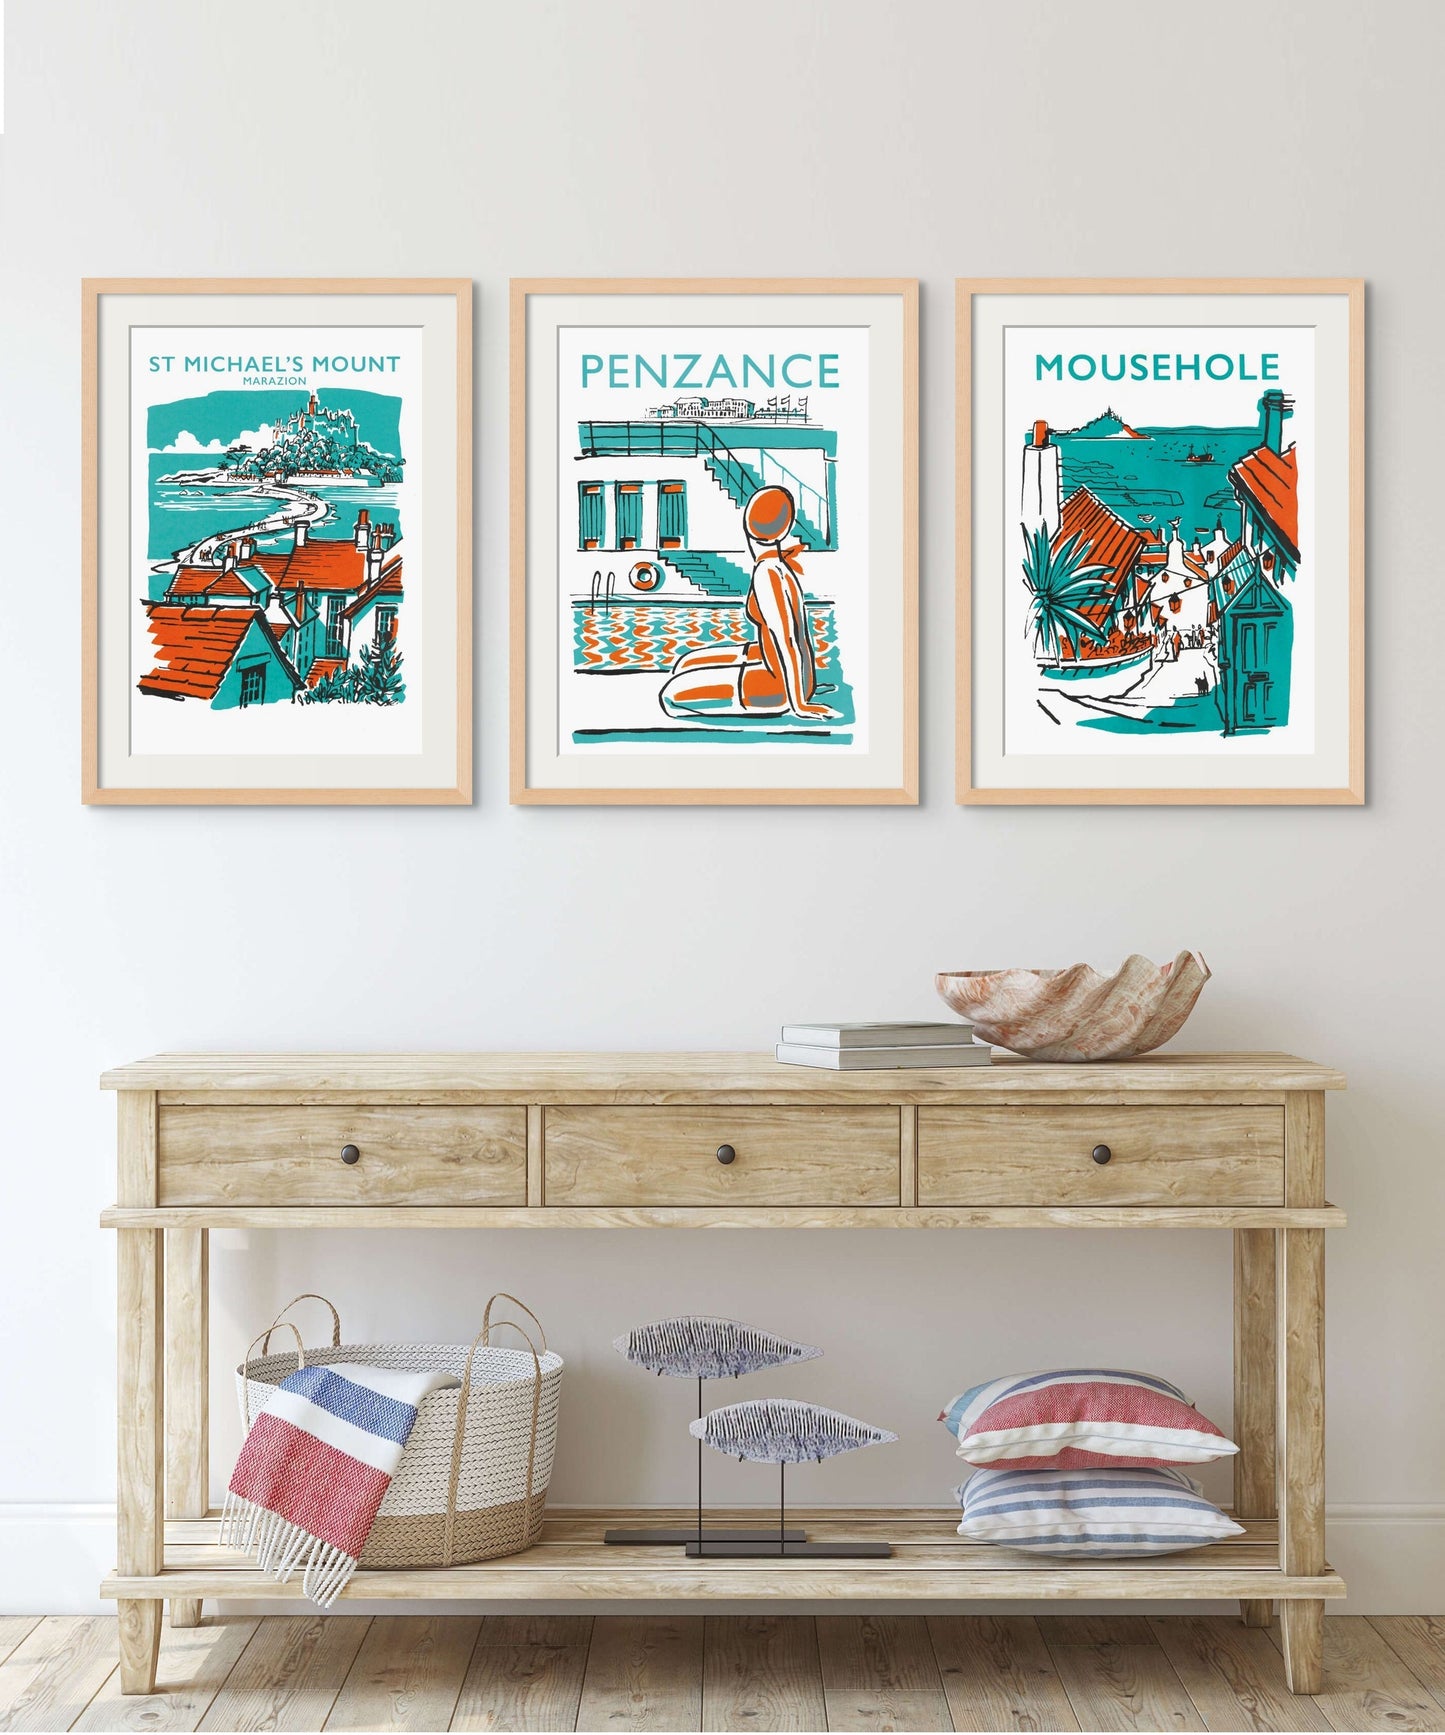 Mousehole - With Text - Art Print